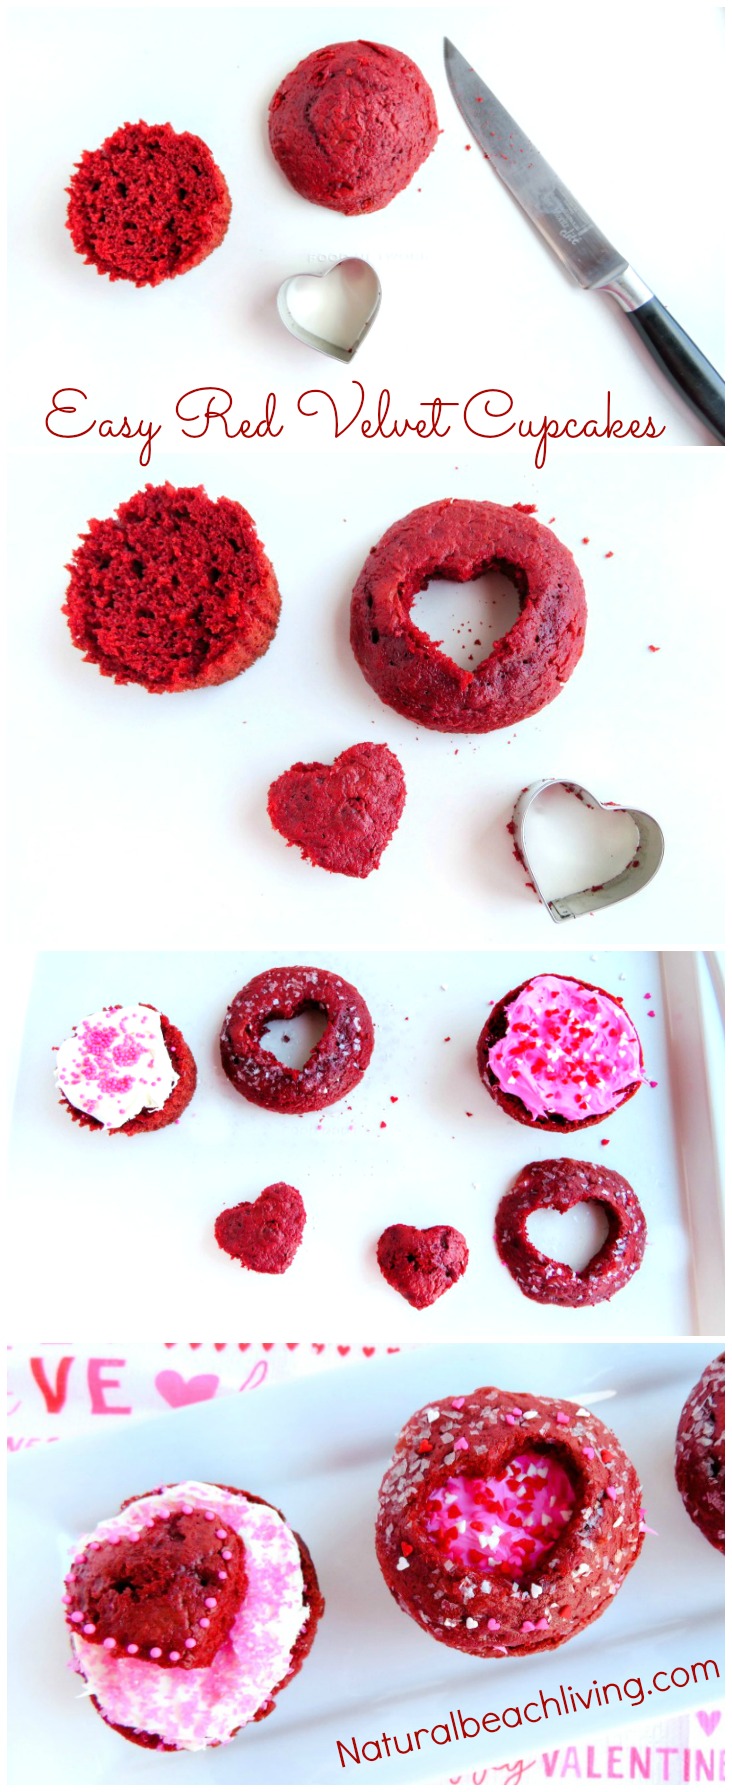 Easy to make Red Velvet Cupcake Ideas Perfect for Valentine's Day, Cooking with Kids, Delicious Red Velvet Cupcakes, Valentine's Desserts 